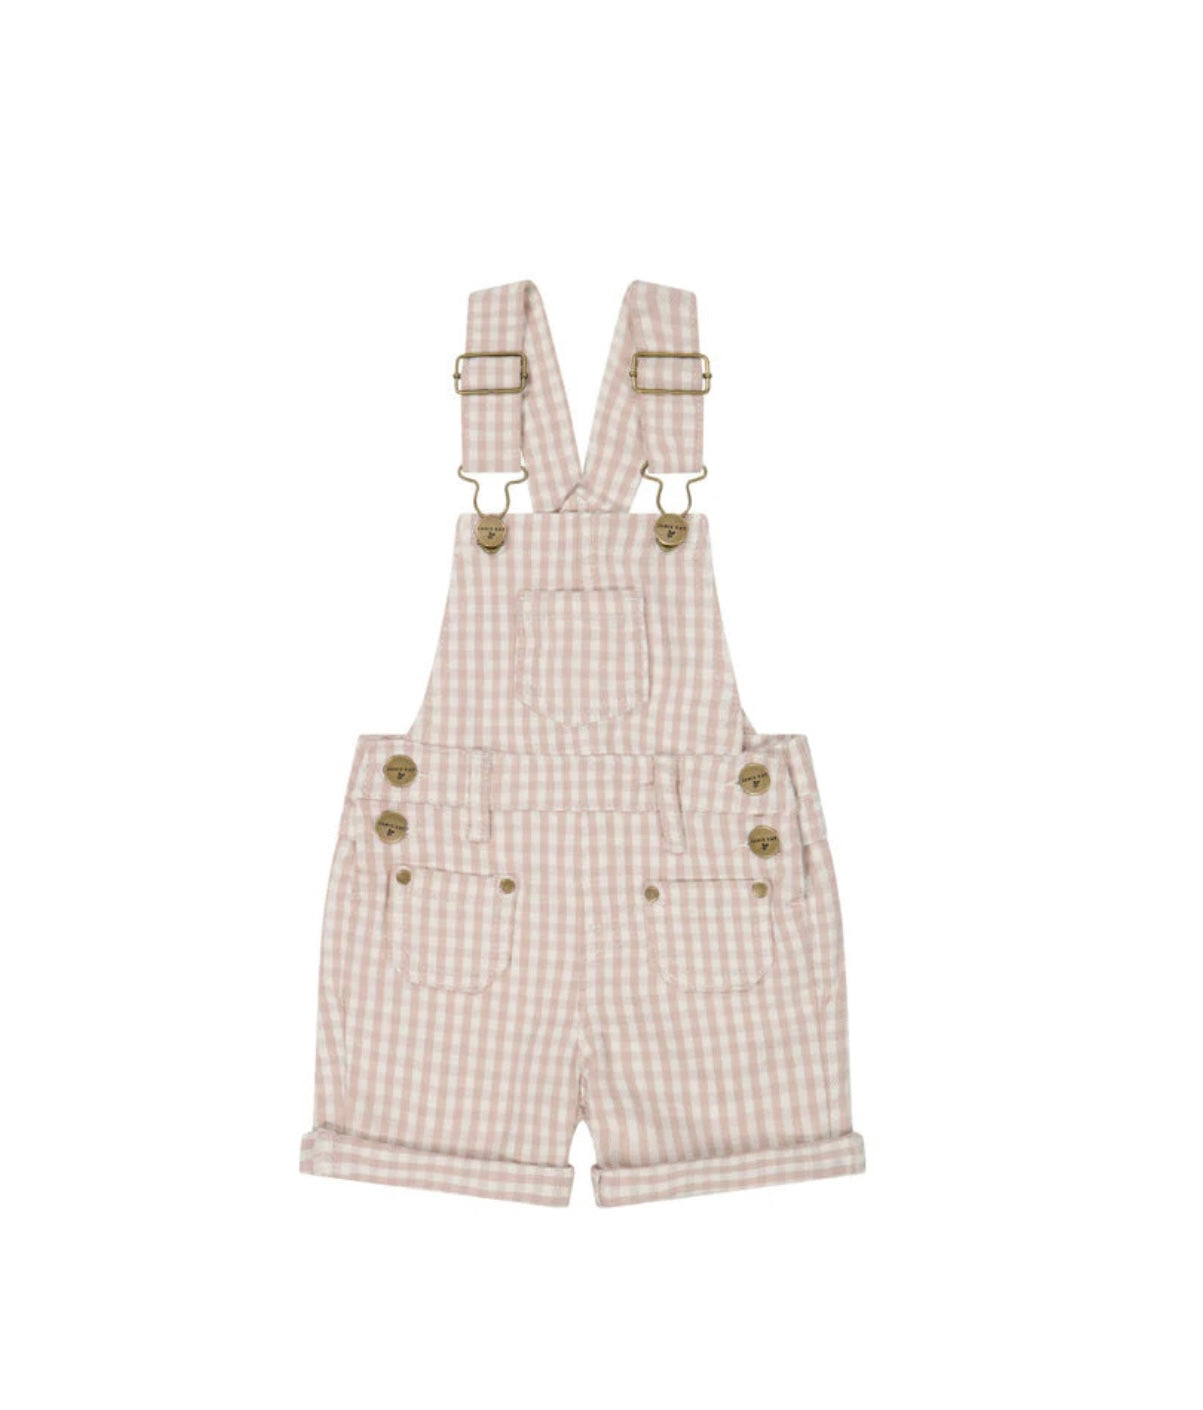 Chase Short Overall - Gingham Pink